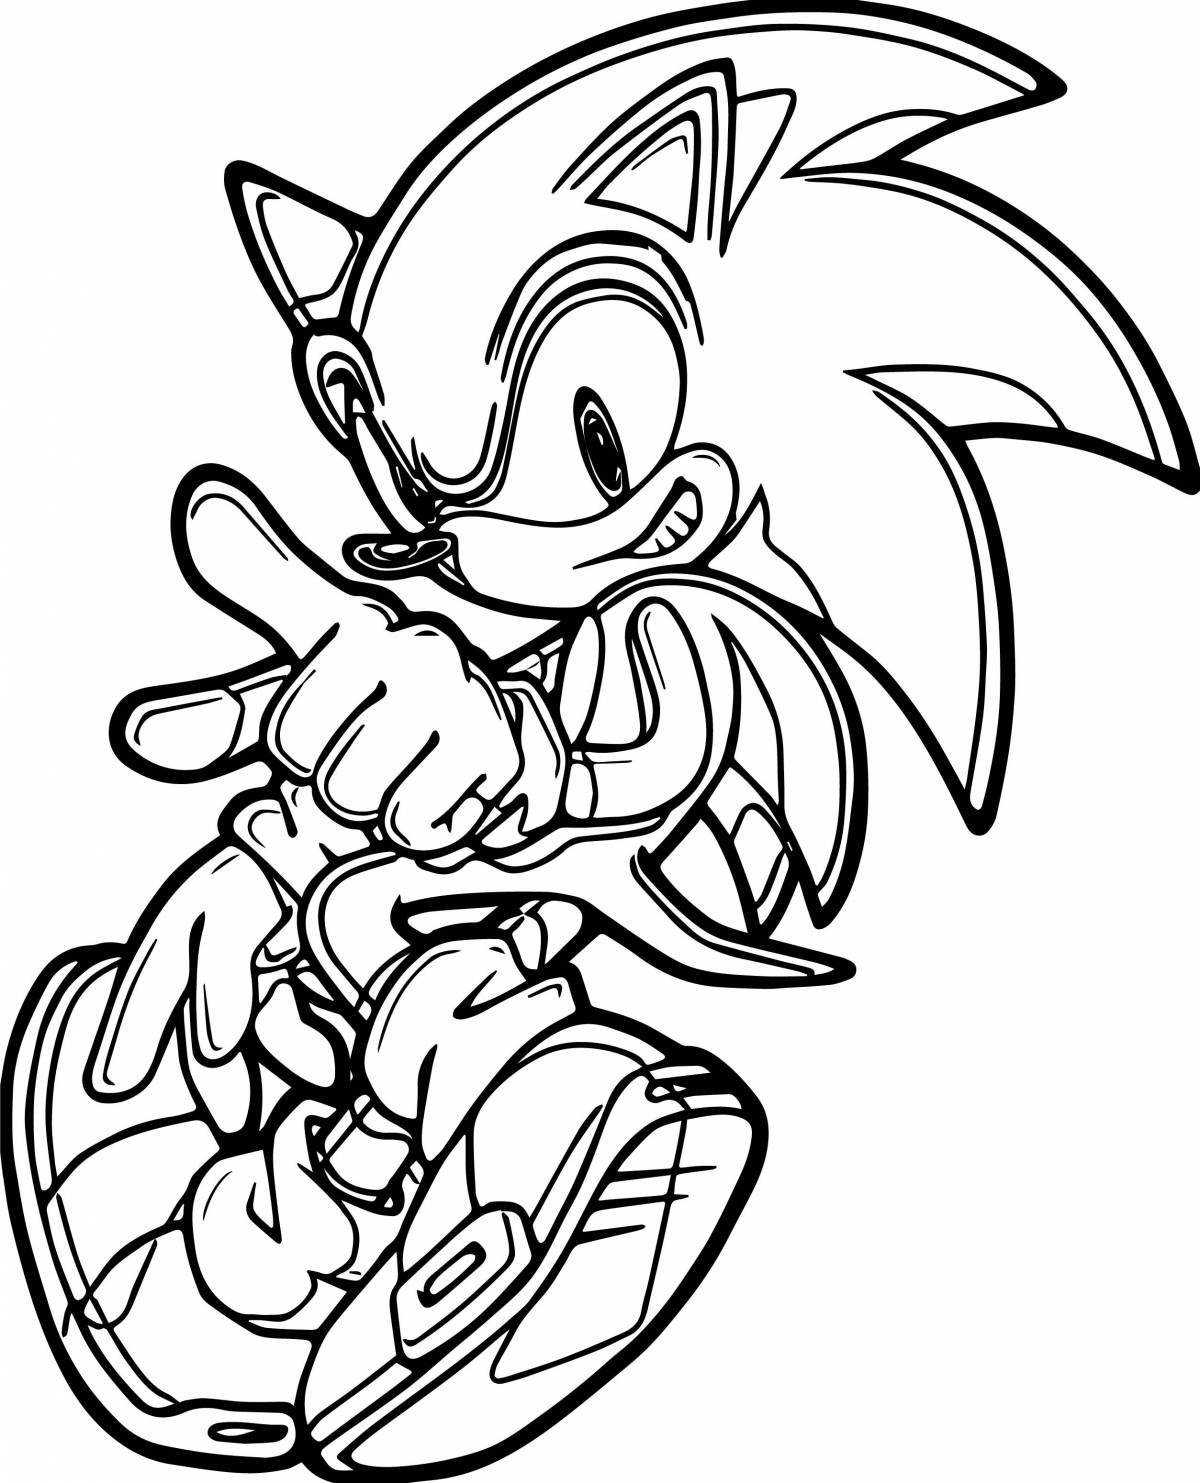 Fascinating super sonic exe coloring book